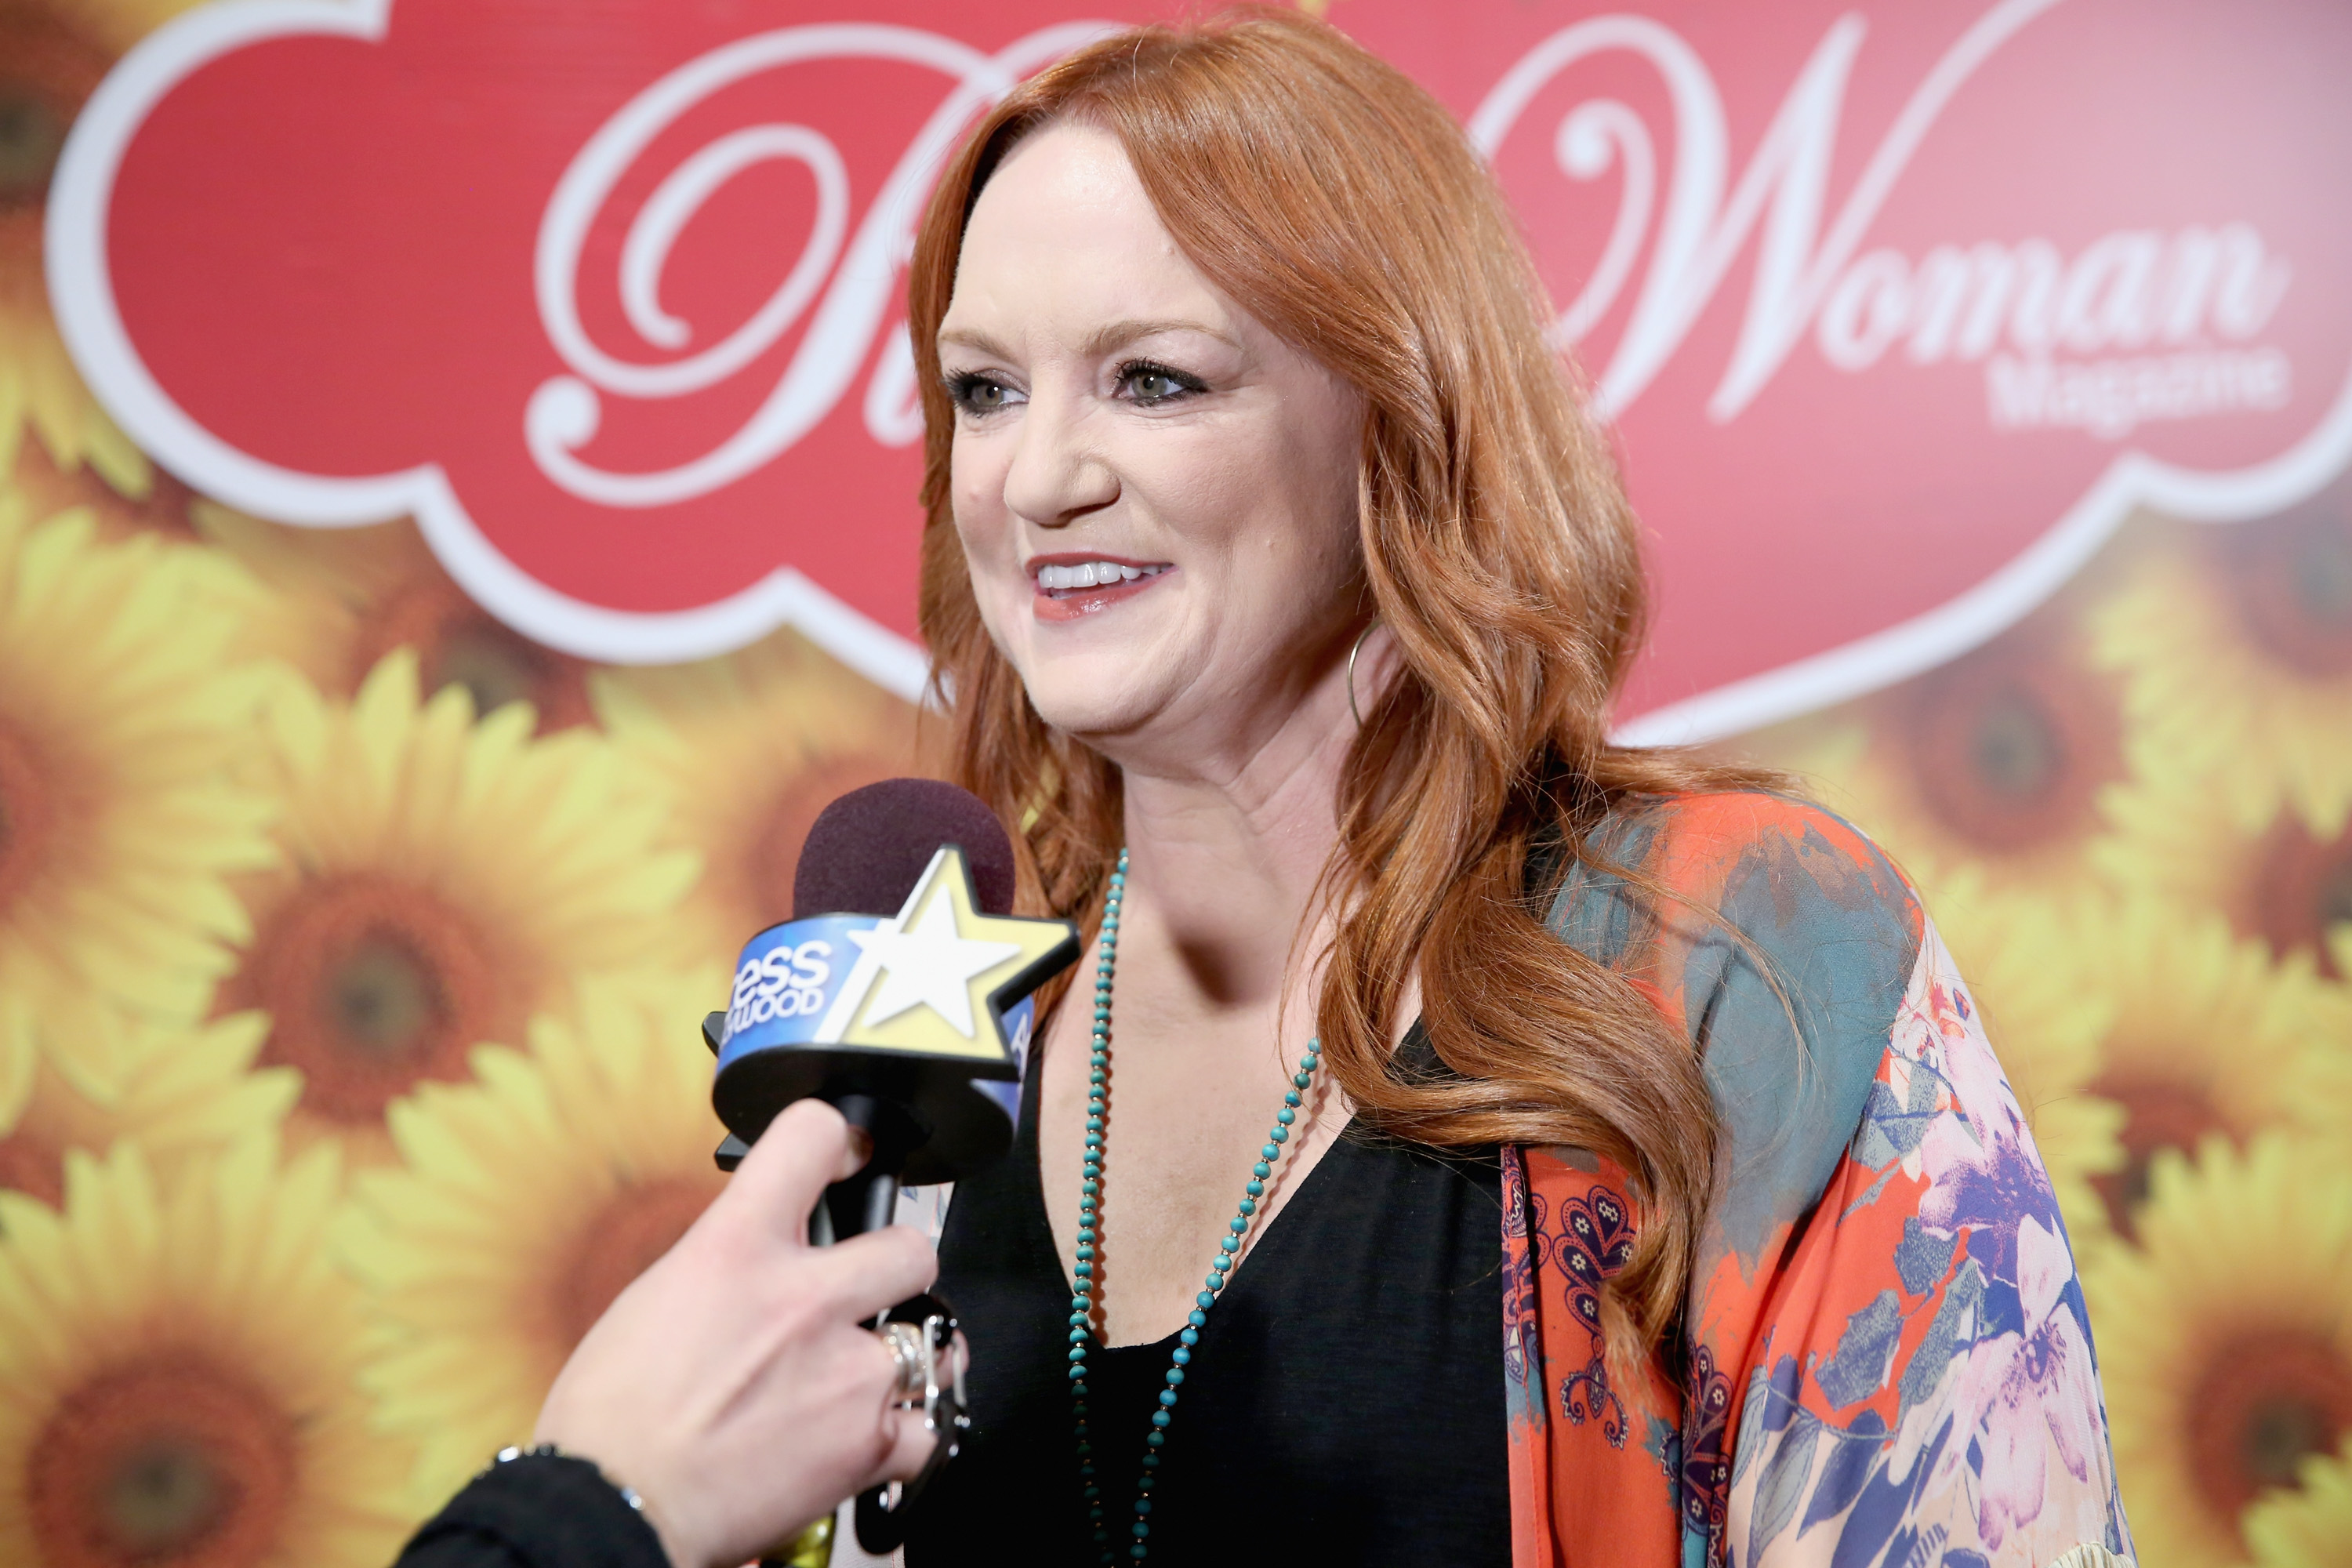 The Pioneer Woman Ree Drummond talks to a reporter at an event. 